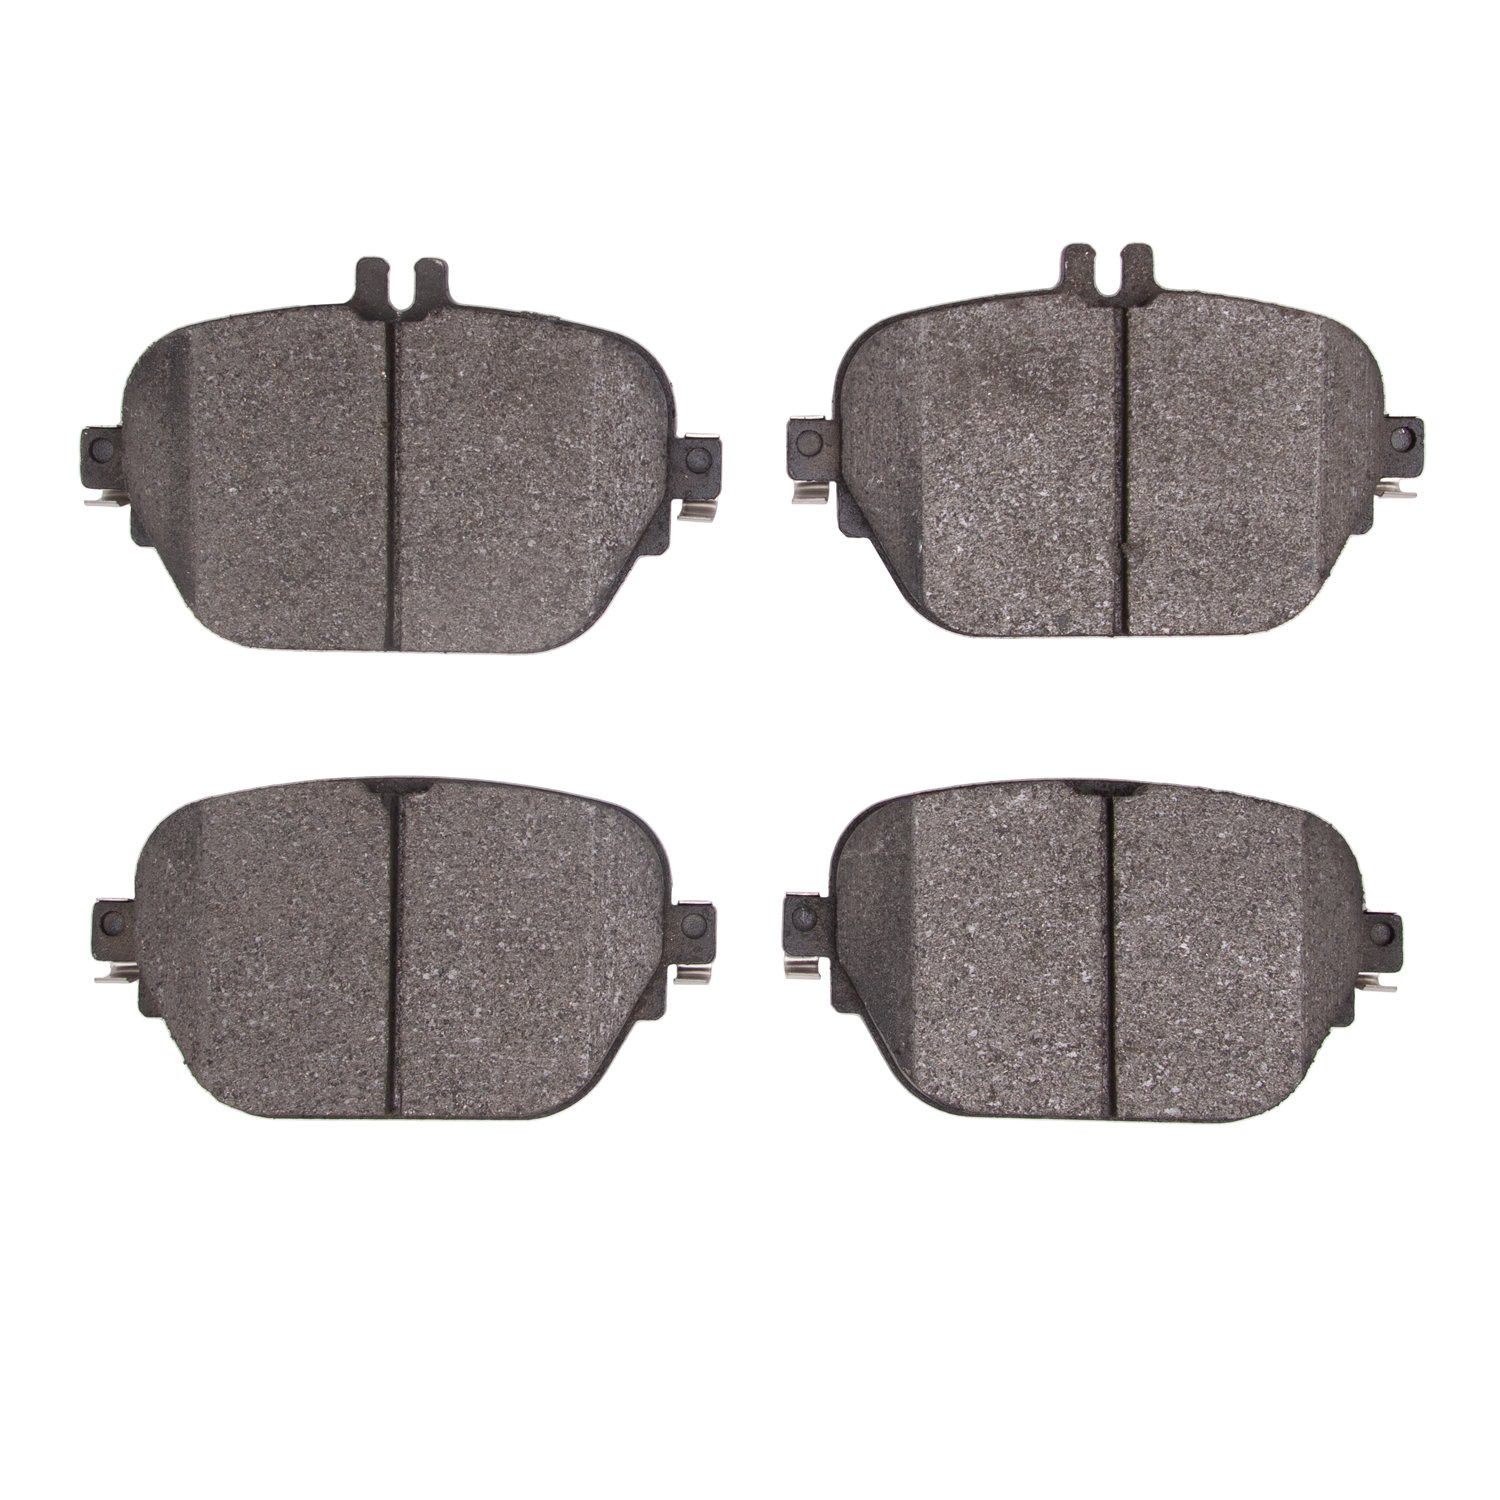 1310-2047-00 3000-Series Ceramic Brake Pads, Fits Select Mercedes-Benz, Position: Rear